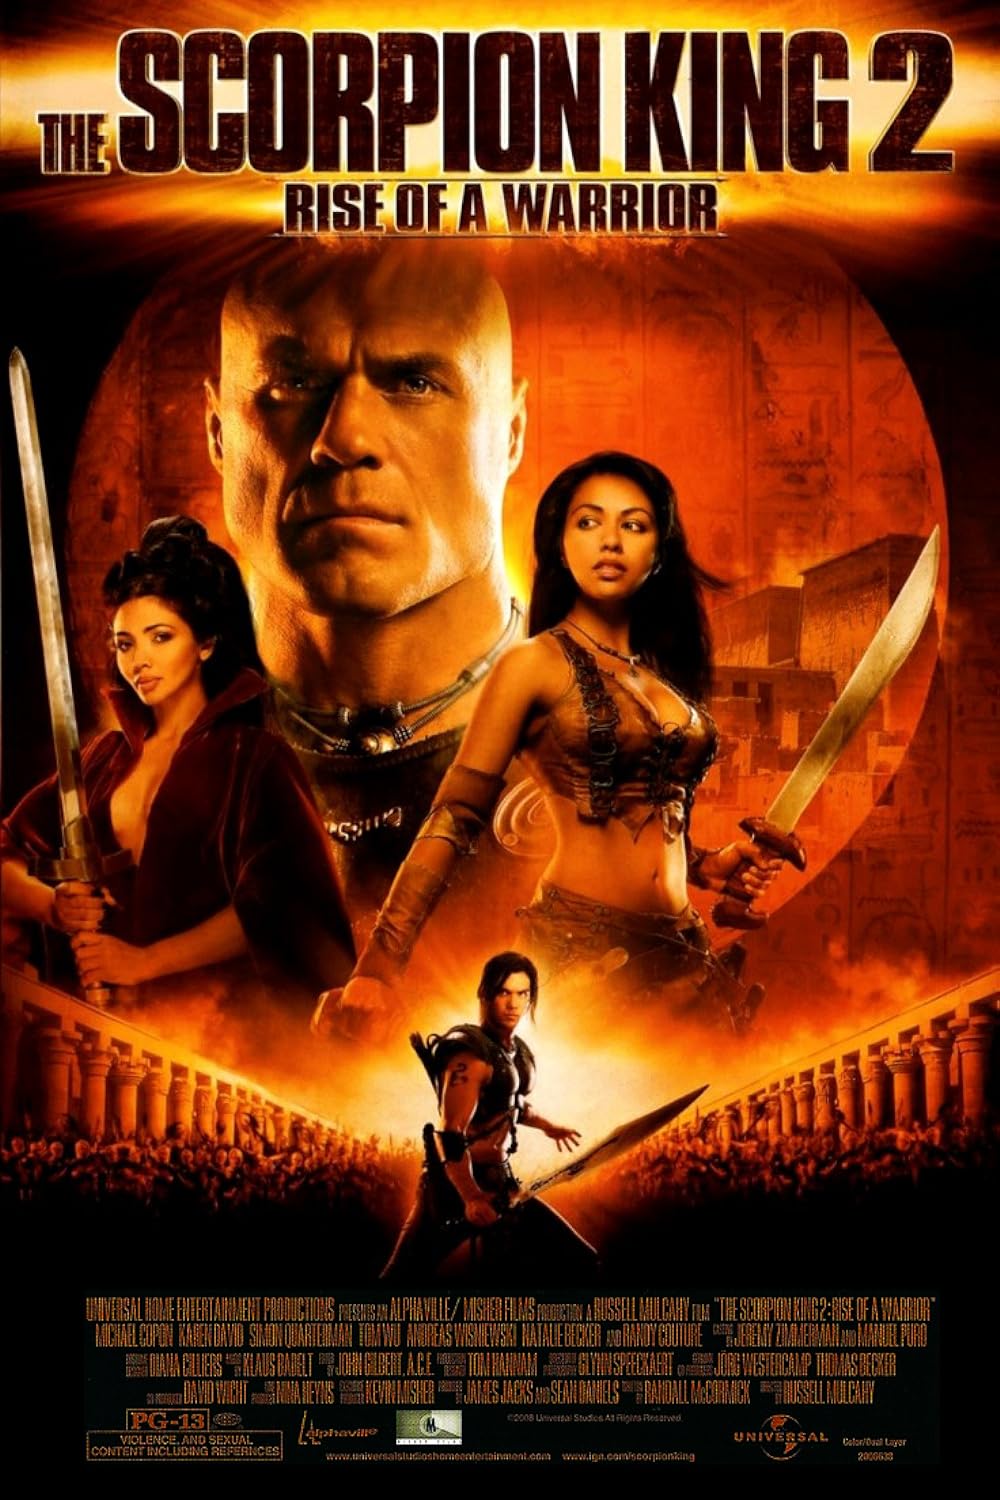 The Scorpion King 2: Rise of a Warrior (2008) 128Kbps 23.976Fps 48Khz 2.0Ch DD+ NF E-AC3 Turkish Audio TAC